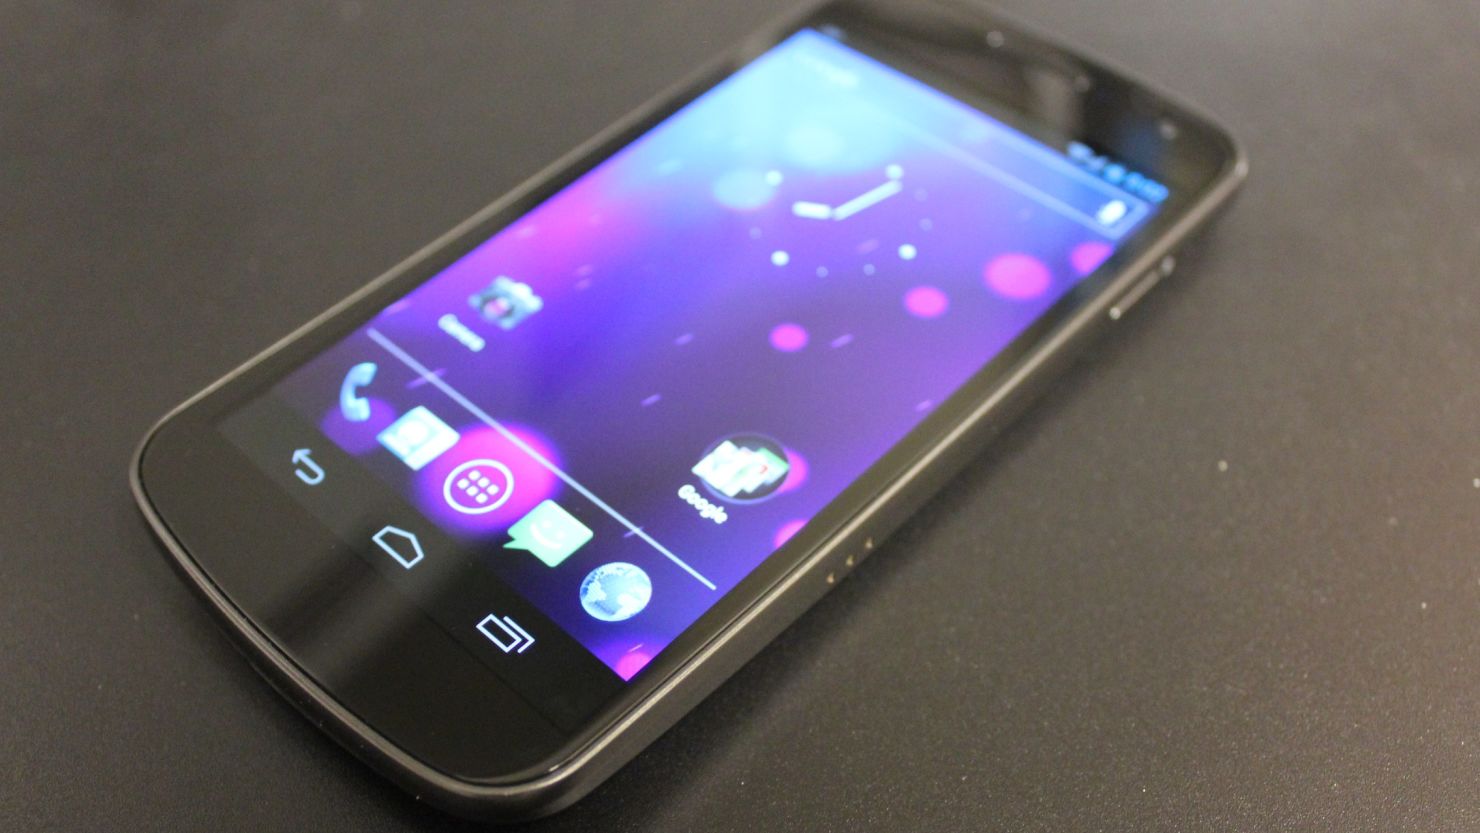 The Galaxy Nexus is the first Google Android phone without four buttons below the screen.